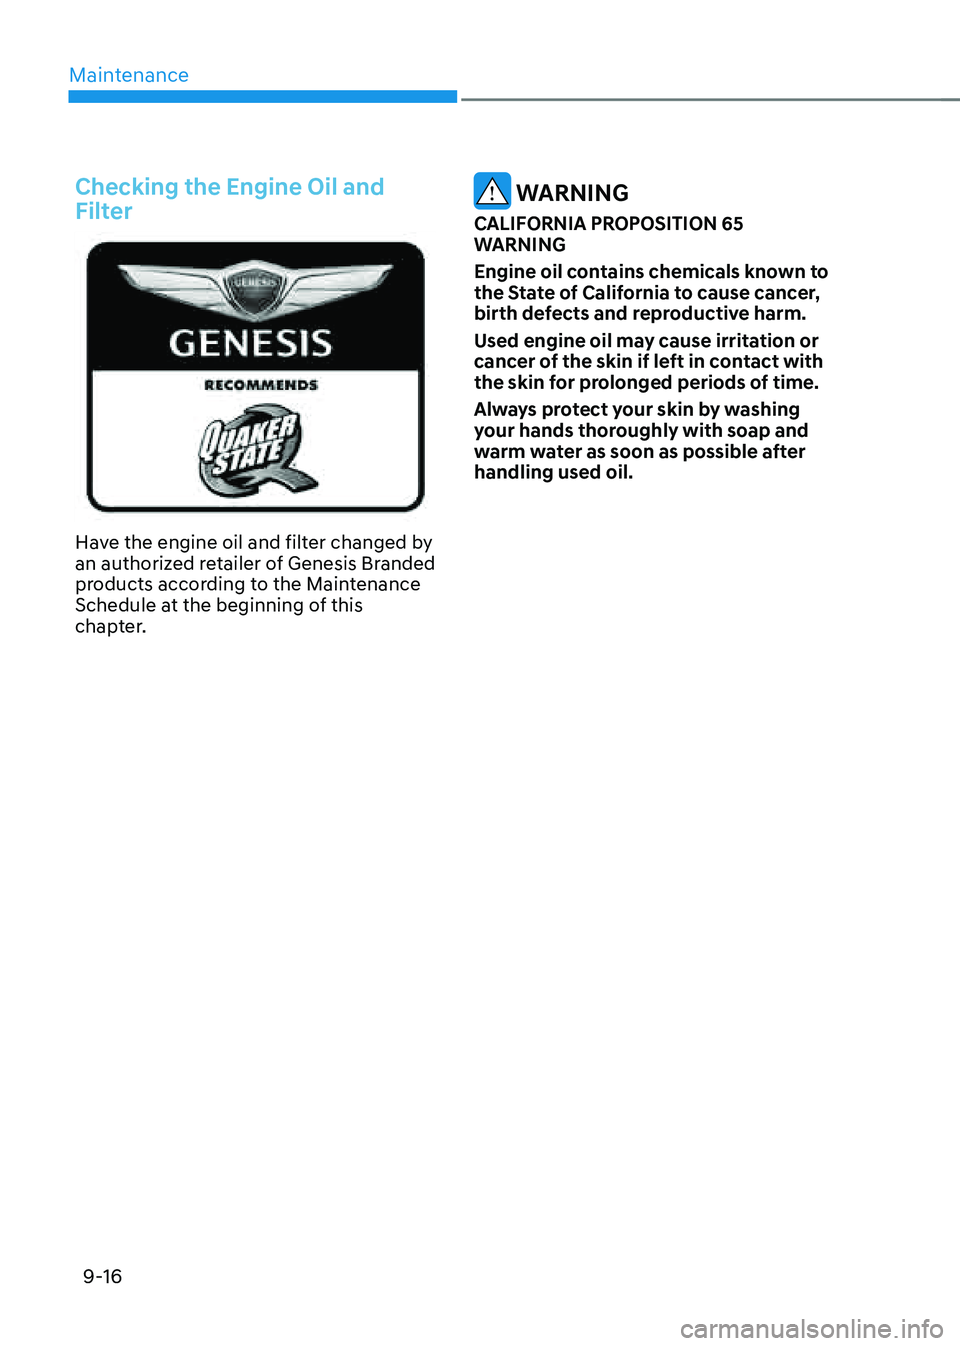 GENESIS GV80 2021 User Guide Maintenance
9-16
Checking the Engine Oil and 
Filter
Have the engine oil and filter changed by an authorized retailer of Genesis Branded 
products according to the Maintenance 
Schedule at the beginni